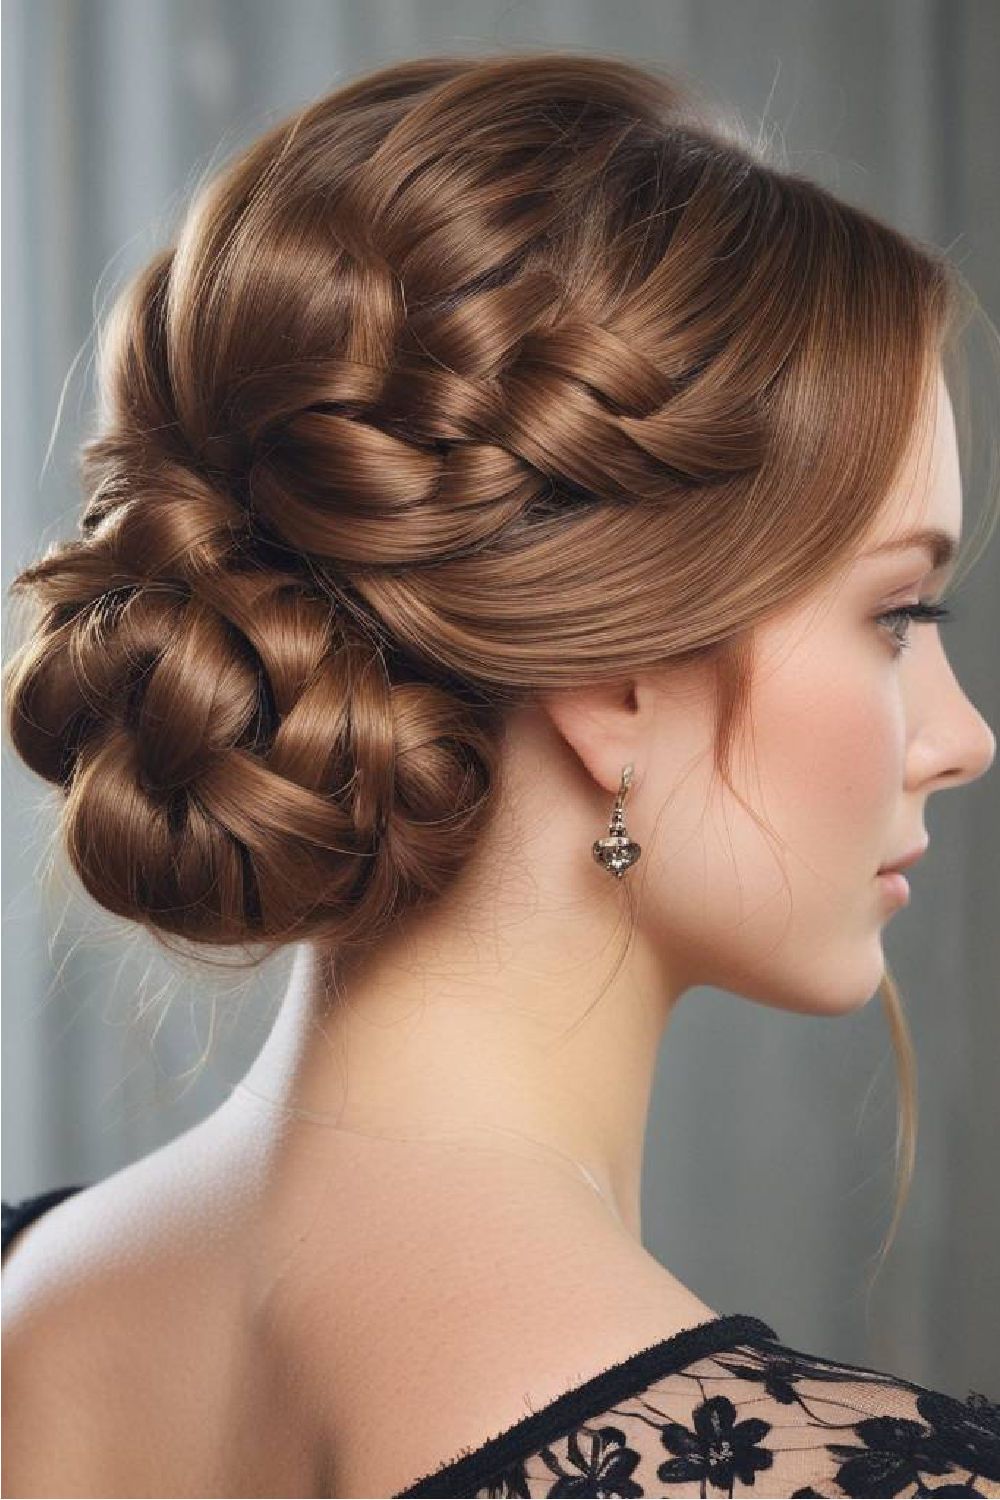 the stylish chignon victorian hairstyle